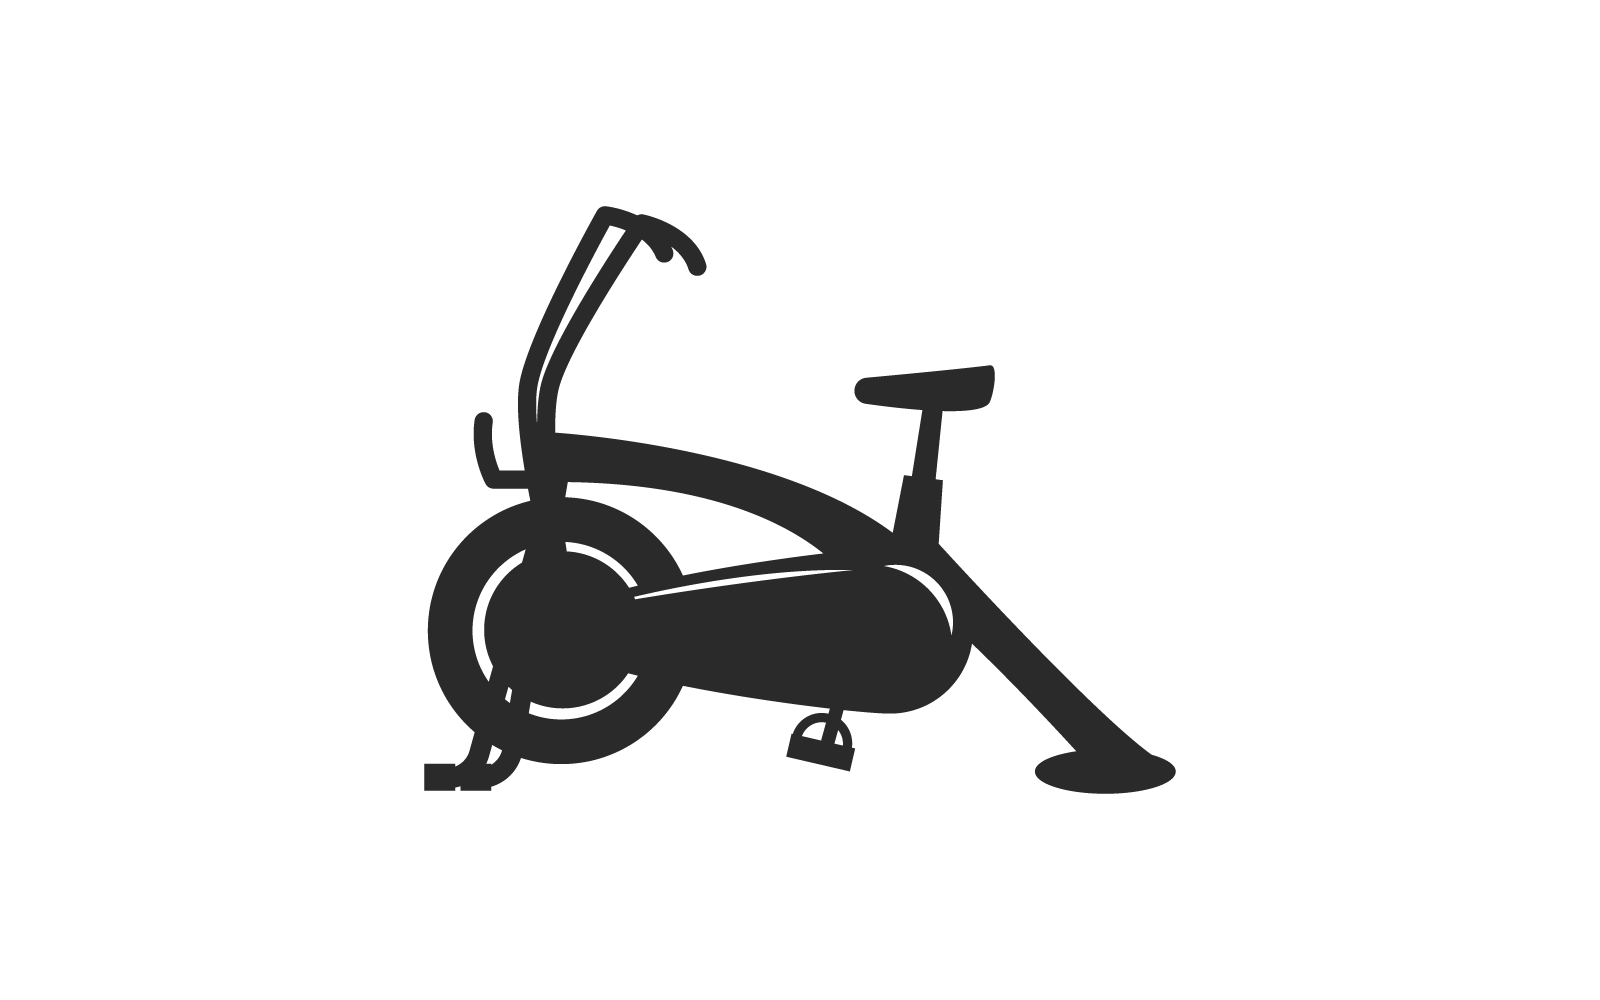 Exercise bicycle fitness icon flat design